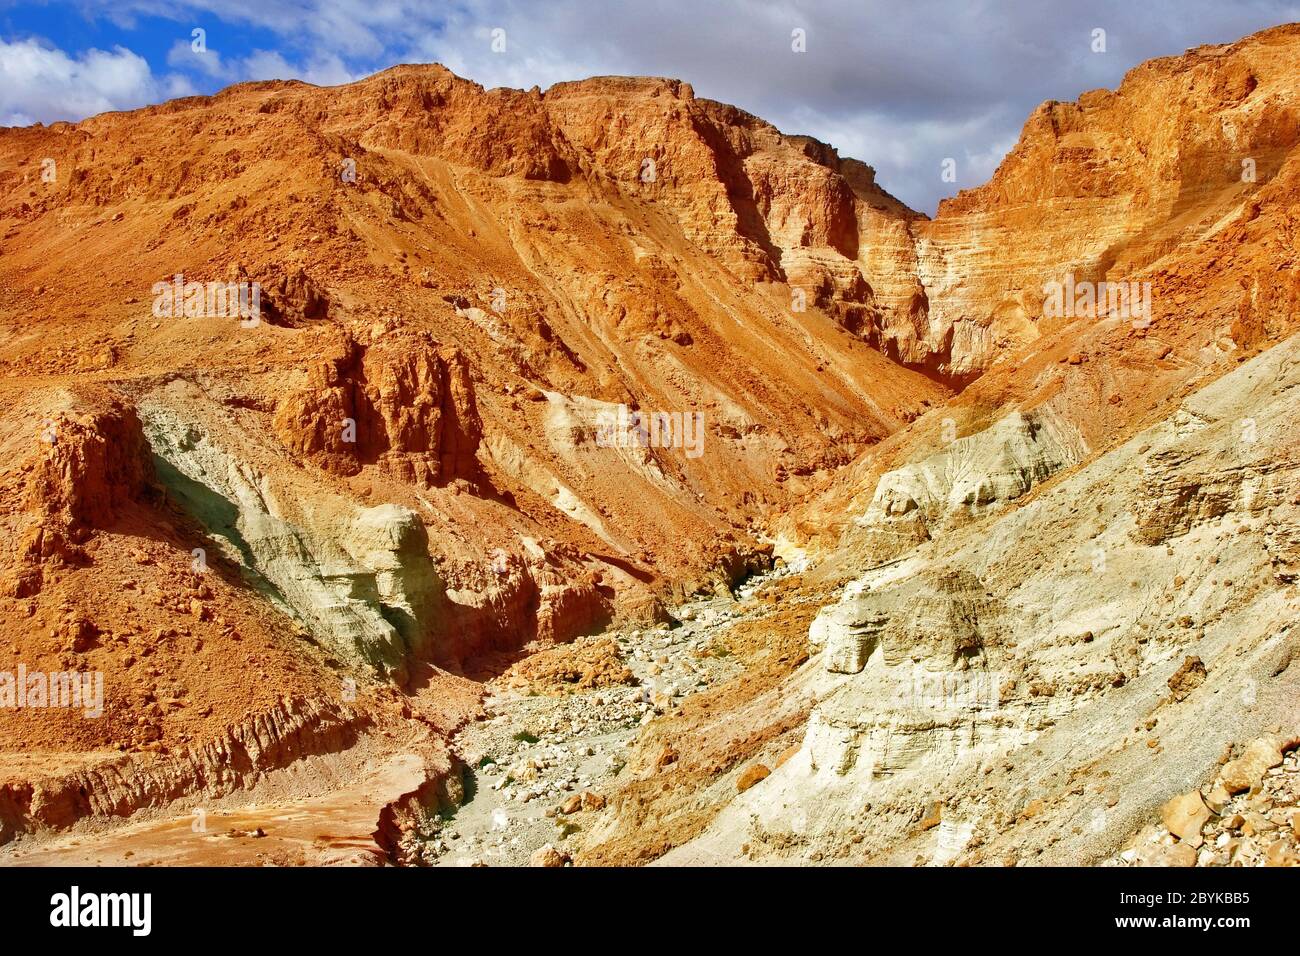 The dried up stream. Stock Photo